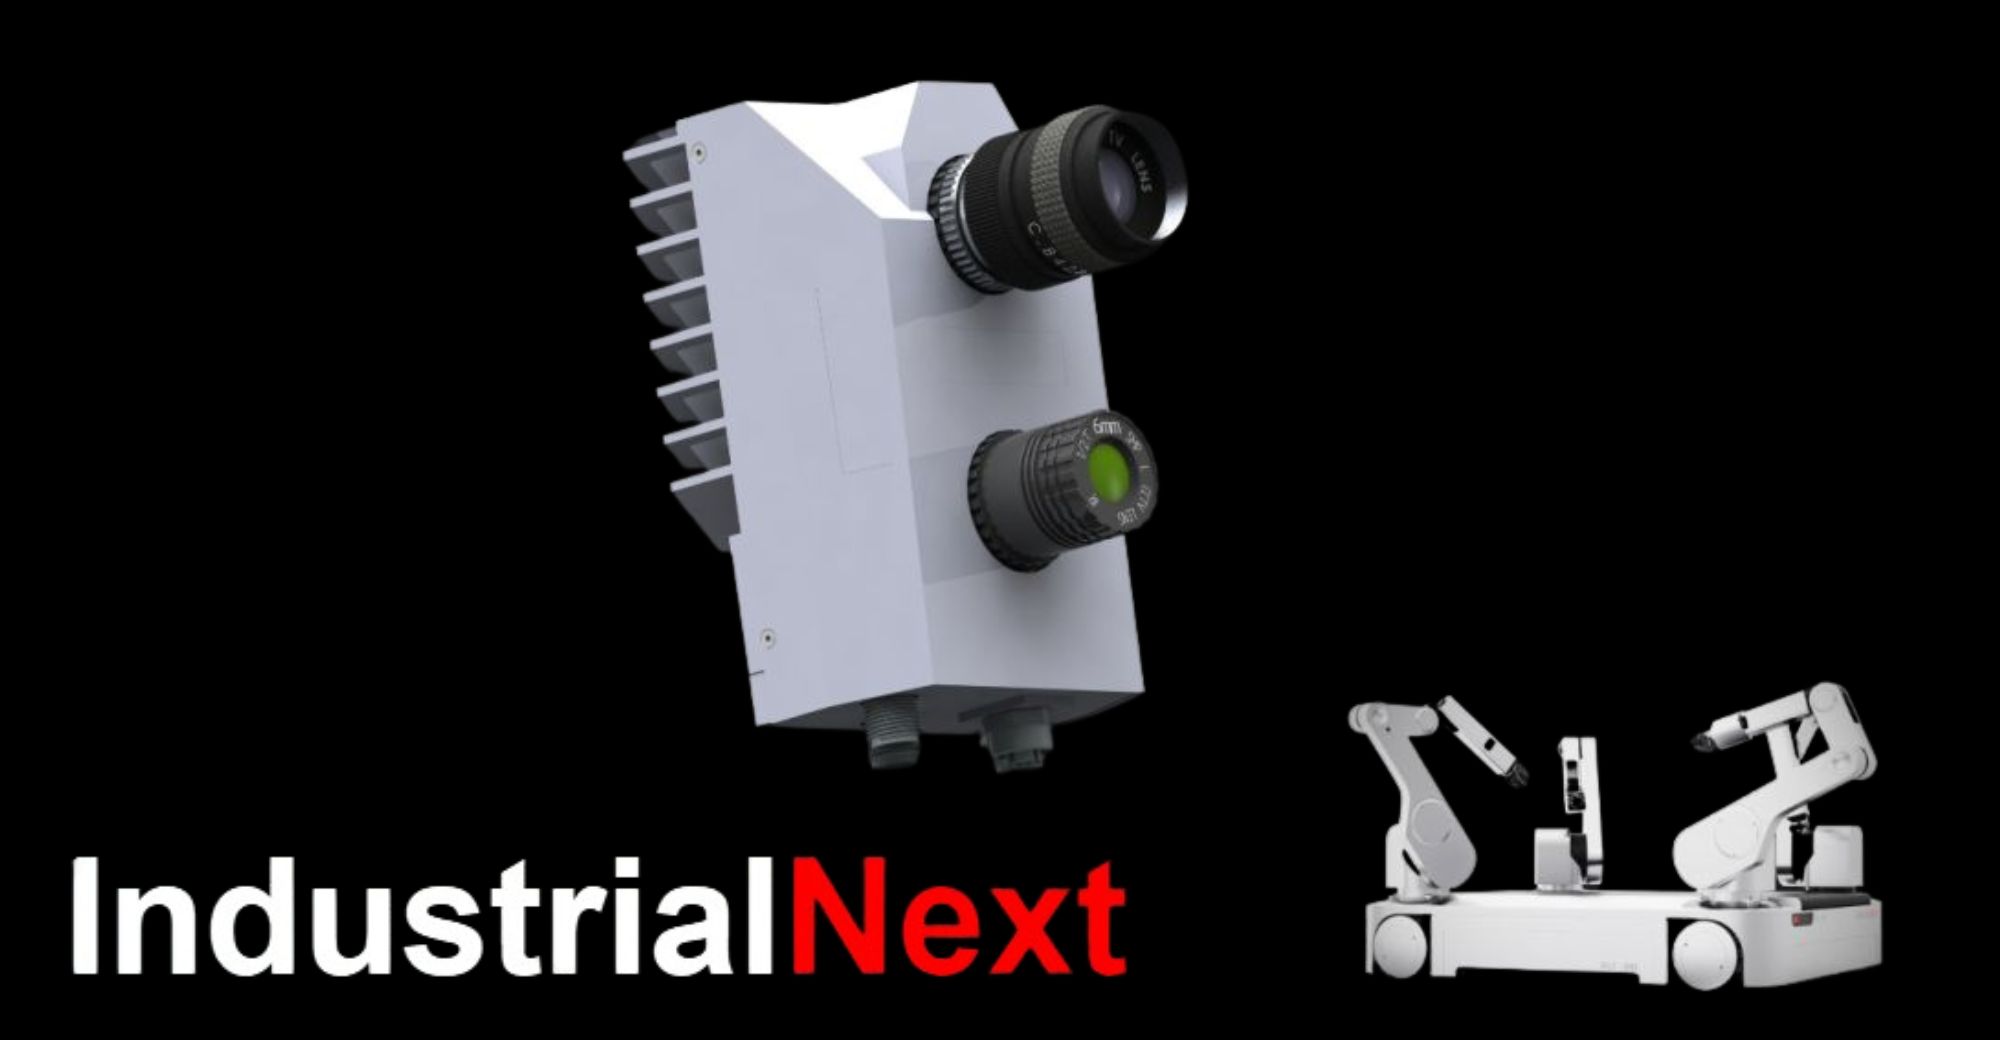 Industrial Next Secures $12M in Pre-A Financing